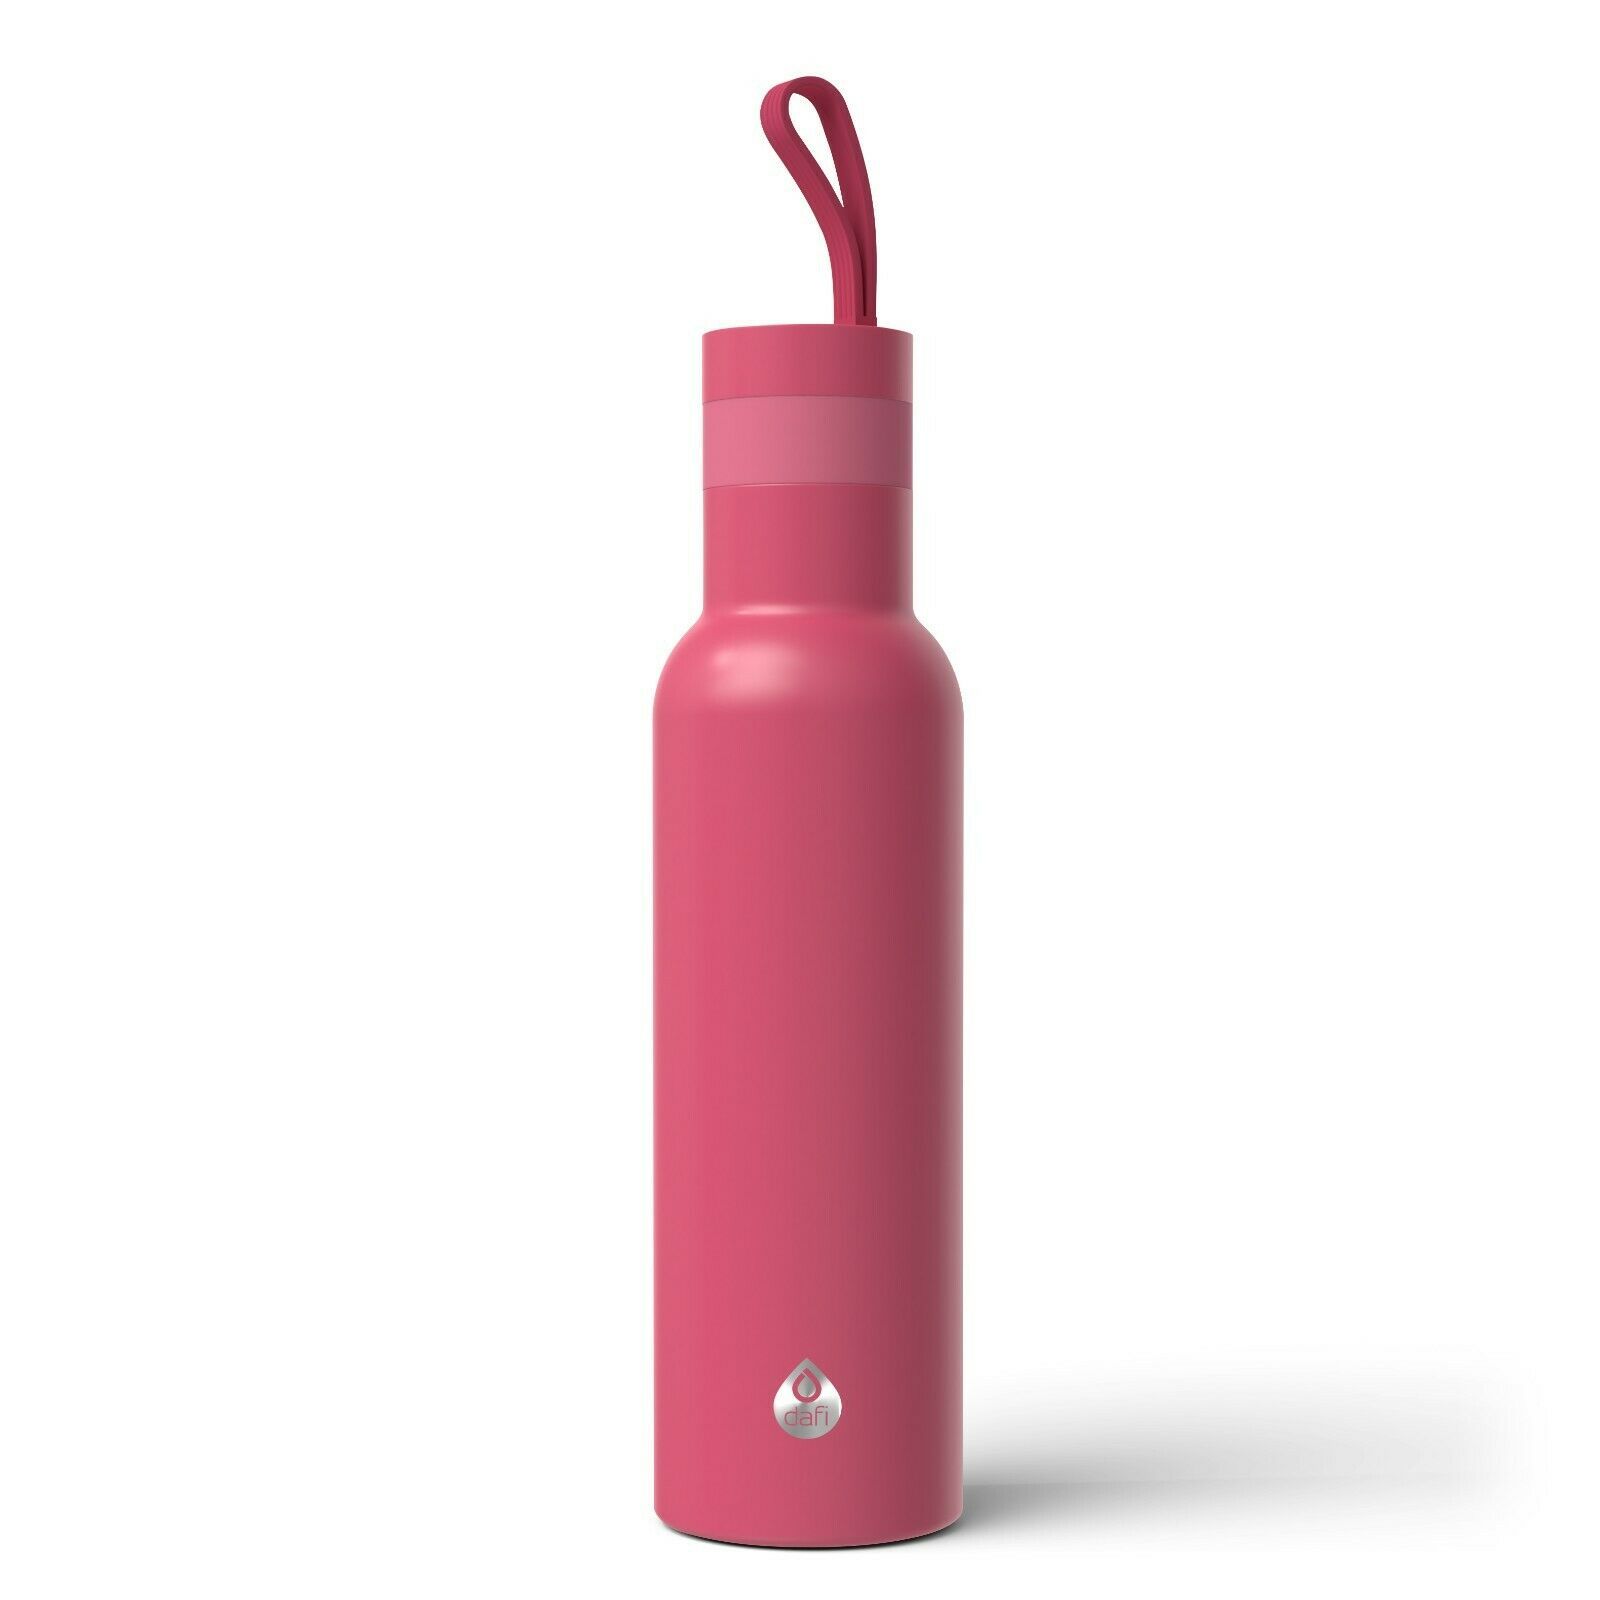 Dafi Double Wall Insulated Stainless Steel Thermal Bottle 17 fl oz Pink BPA-Free